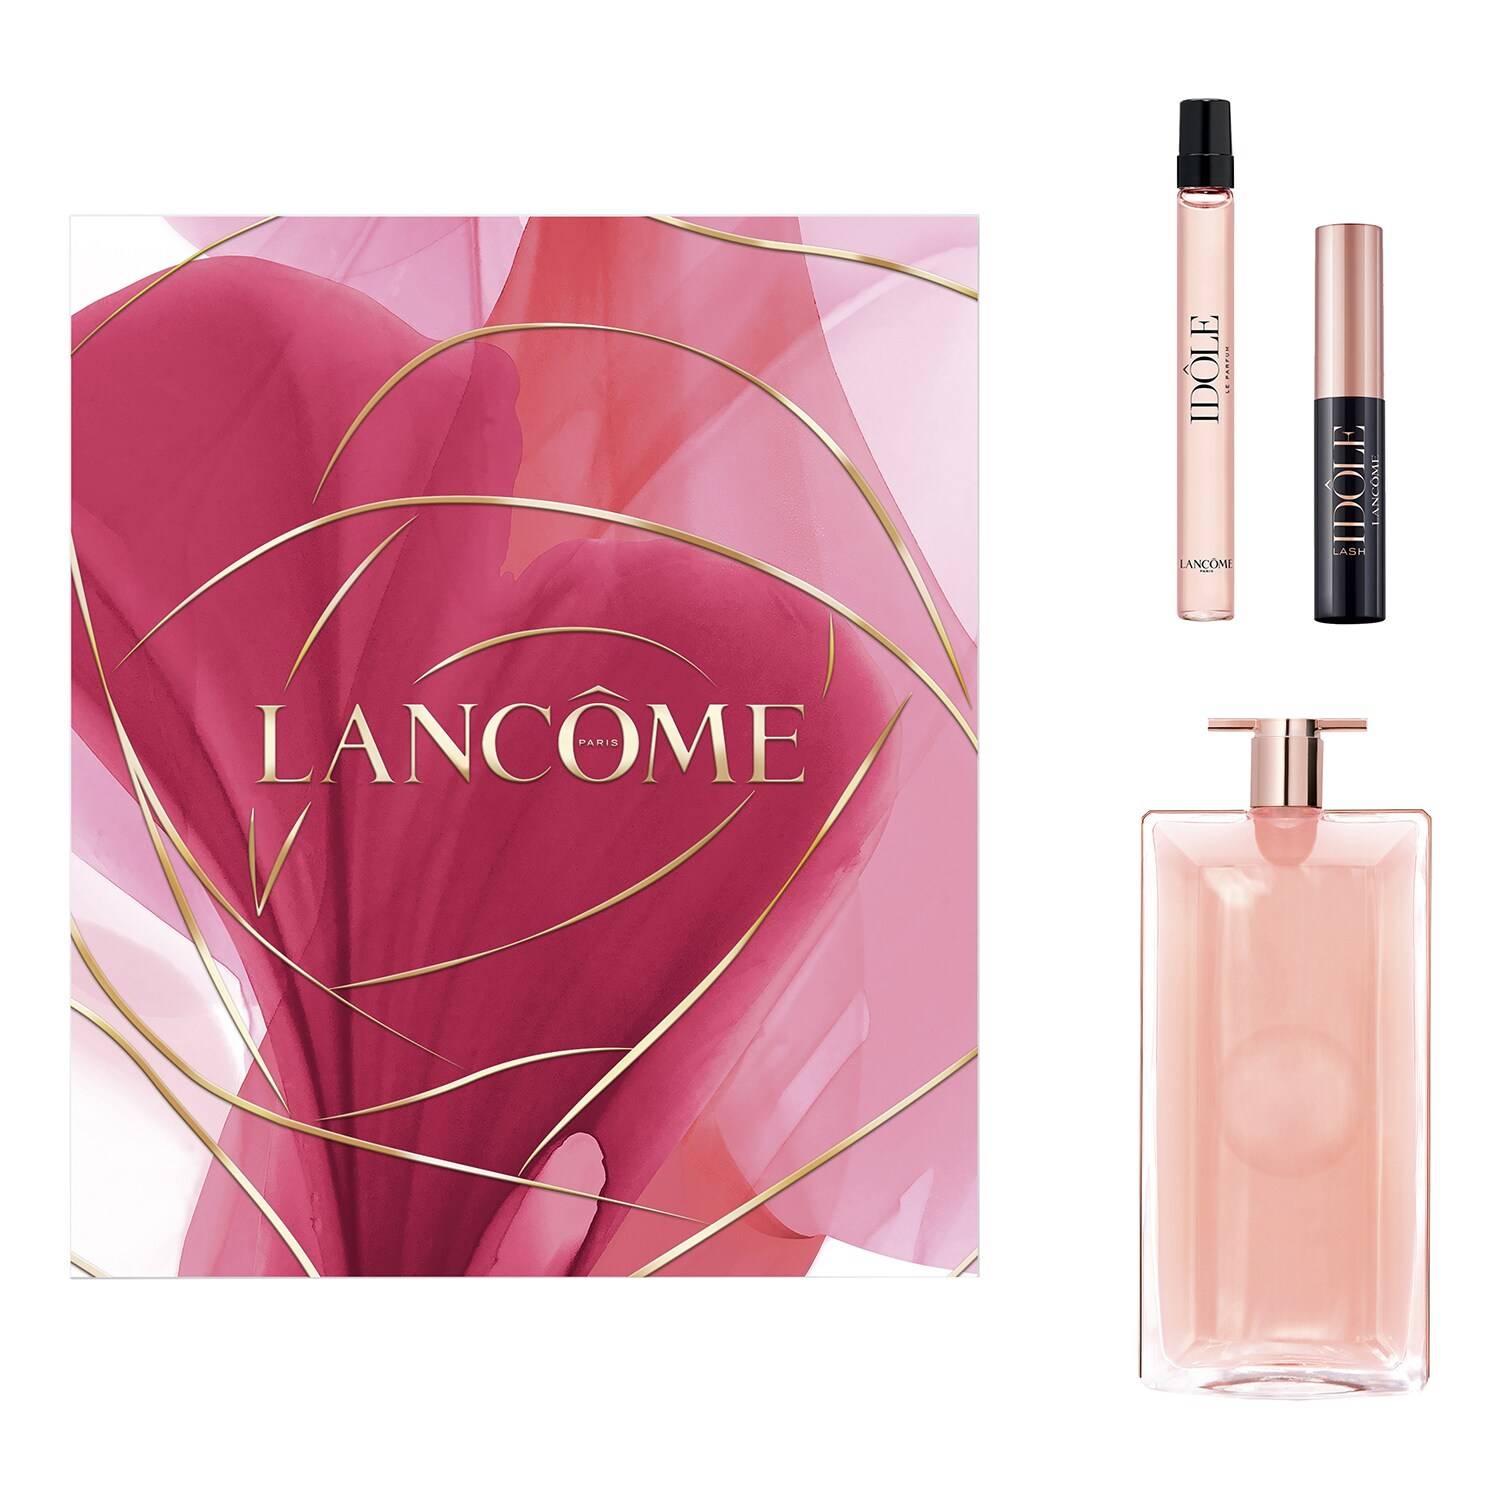 Lancome Idole Fragrance Mother's Day Limited Edition Gift Set